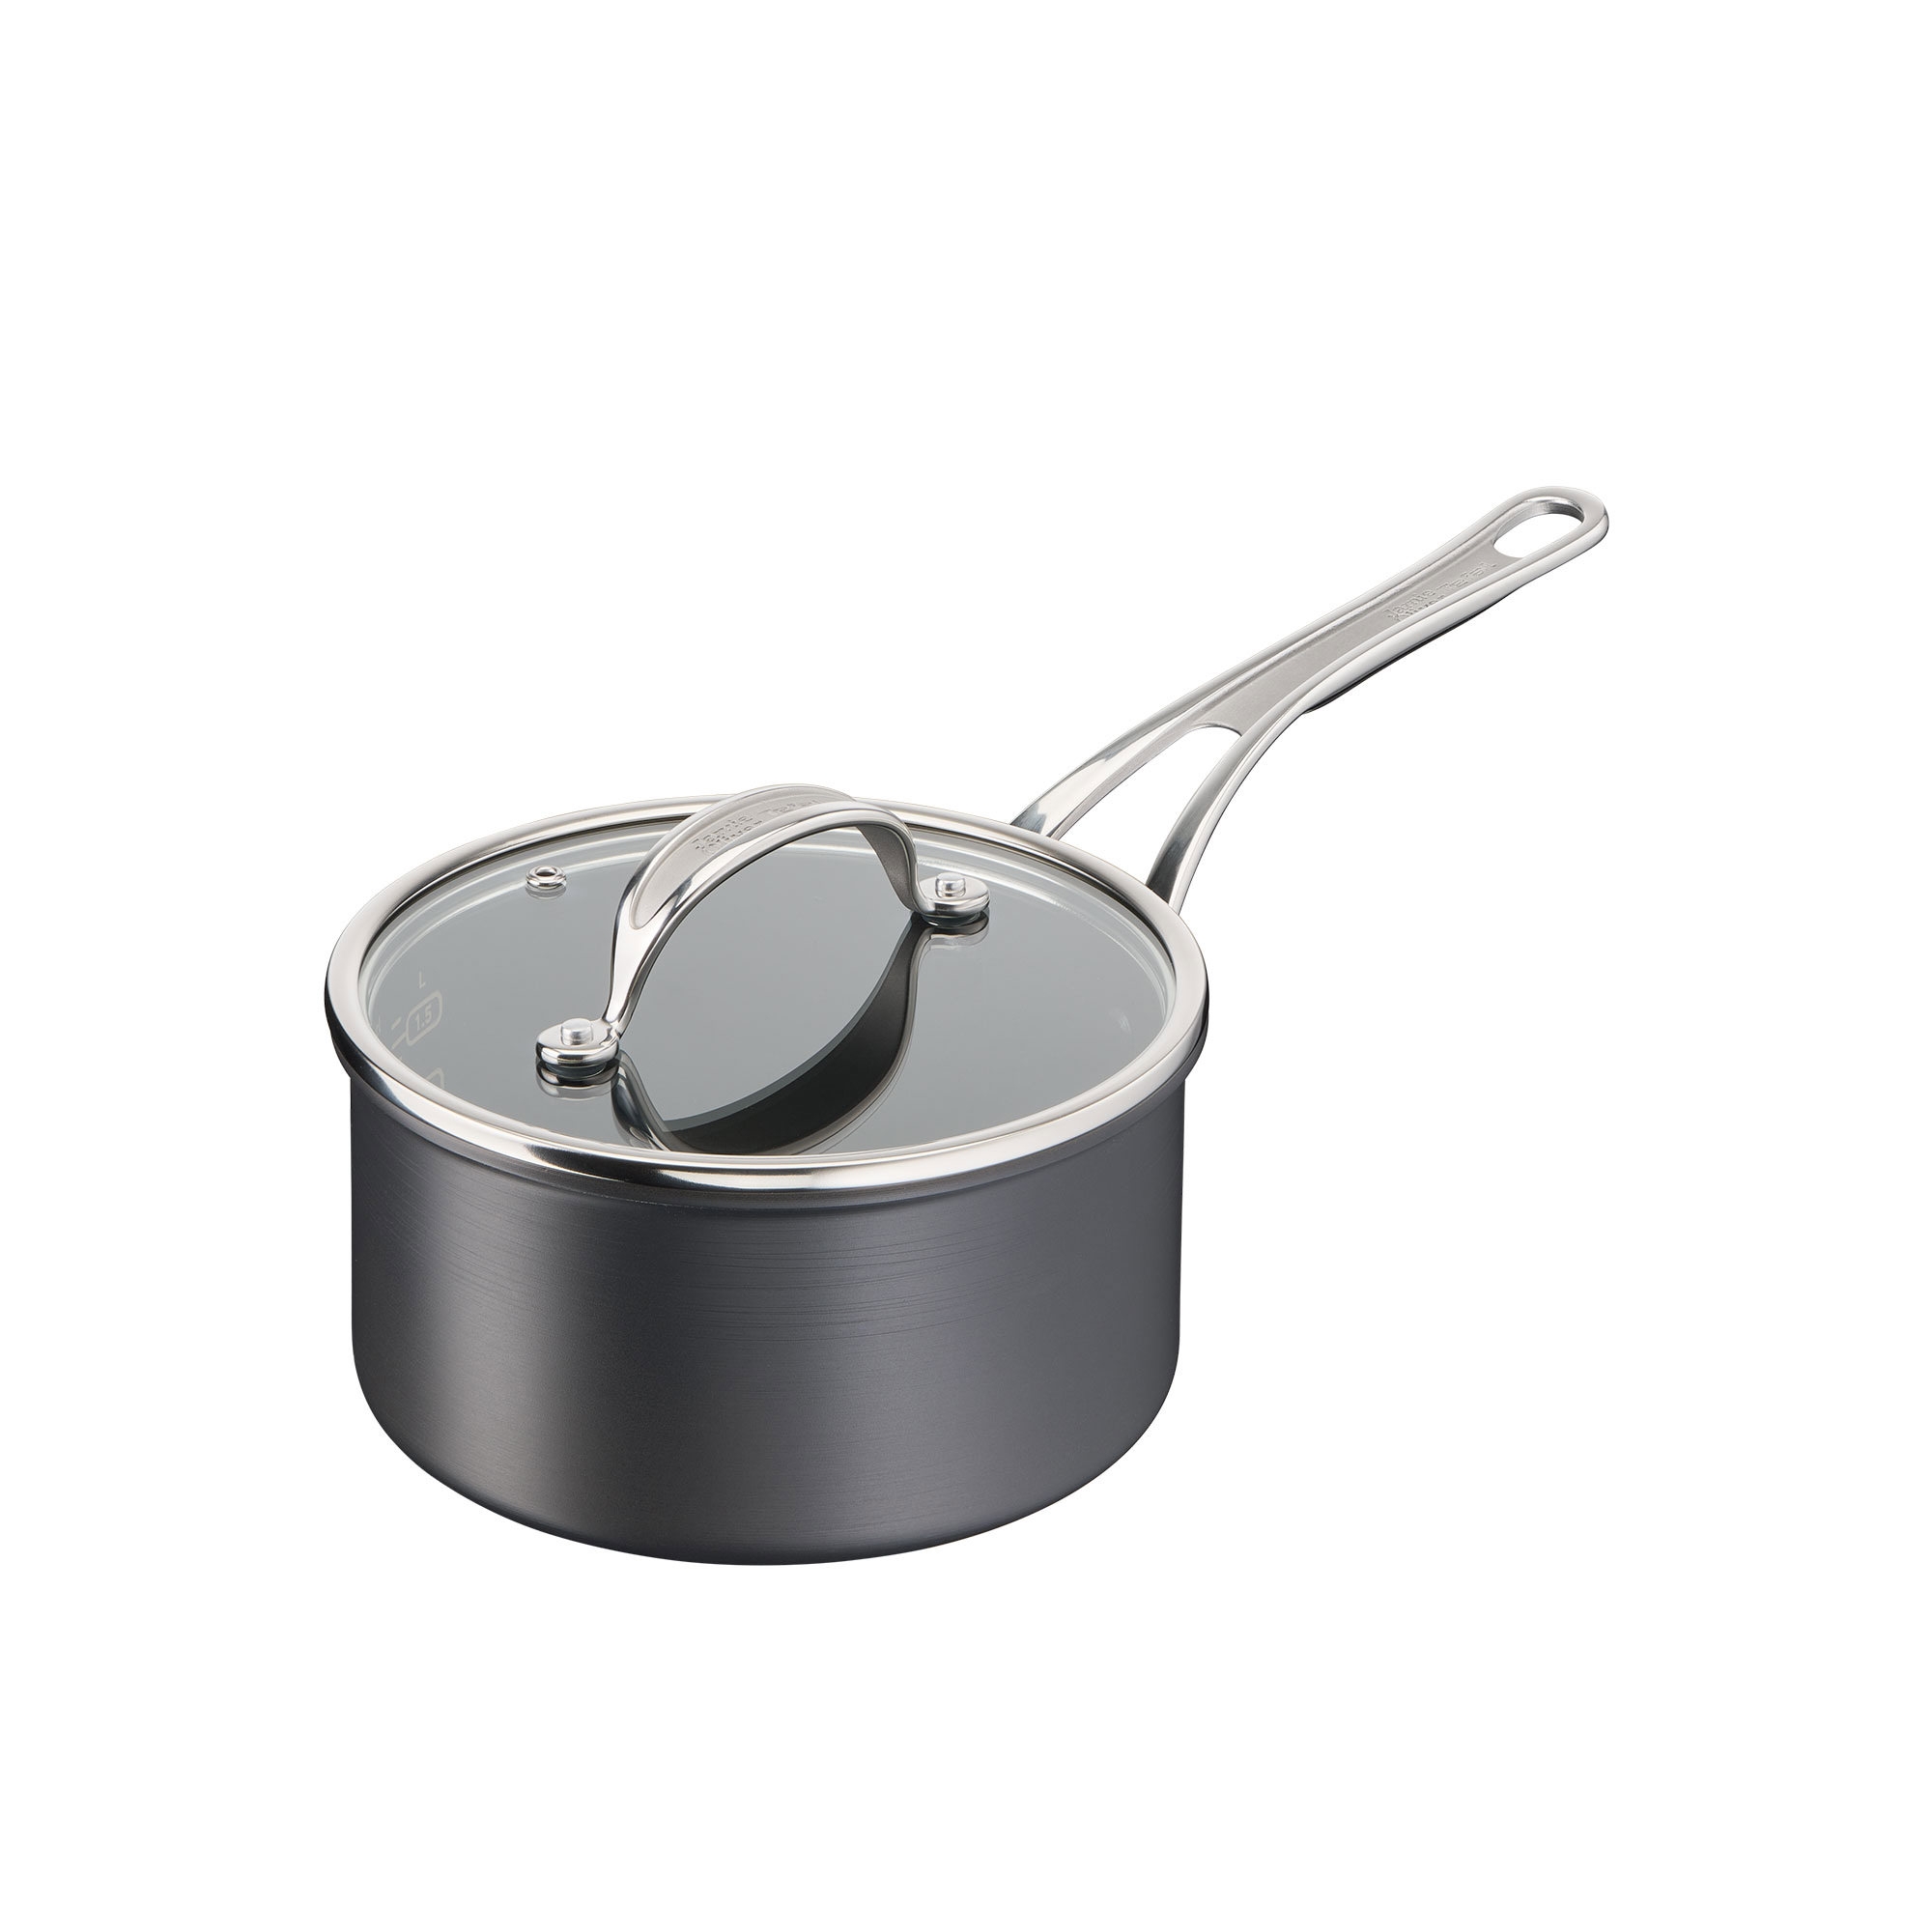 Jamie Oliver by Tefal Cook's Classic Non Stick Induction Saucepan 18cm - 2.2L Image 1